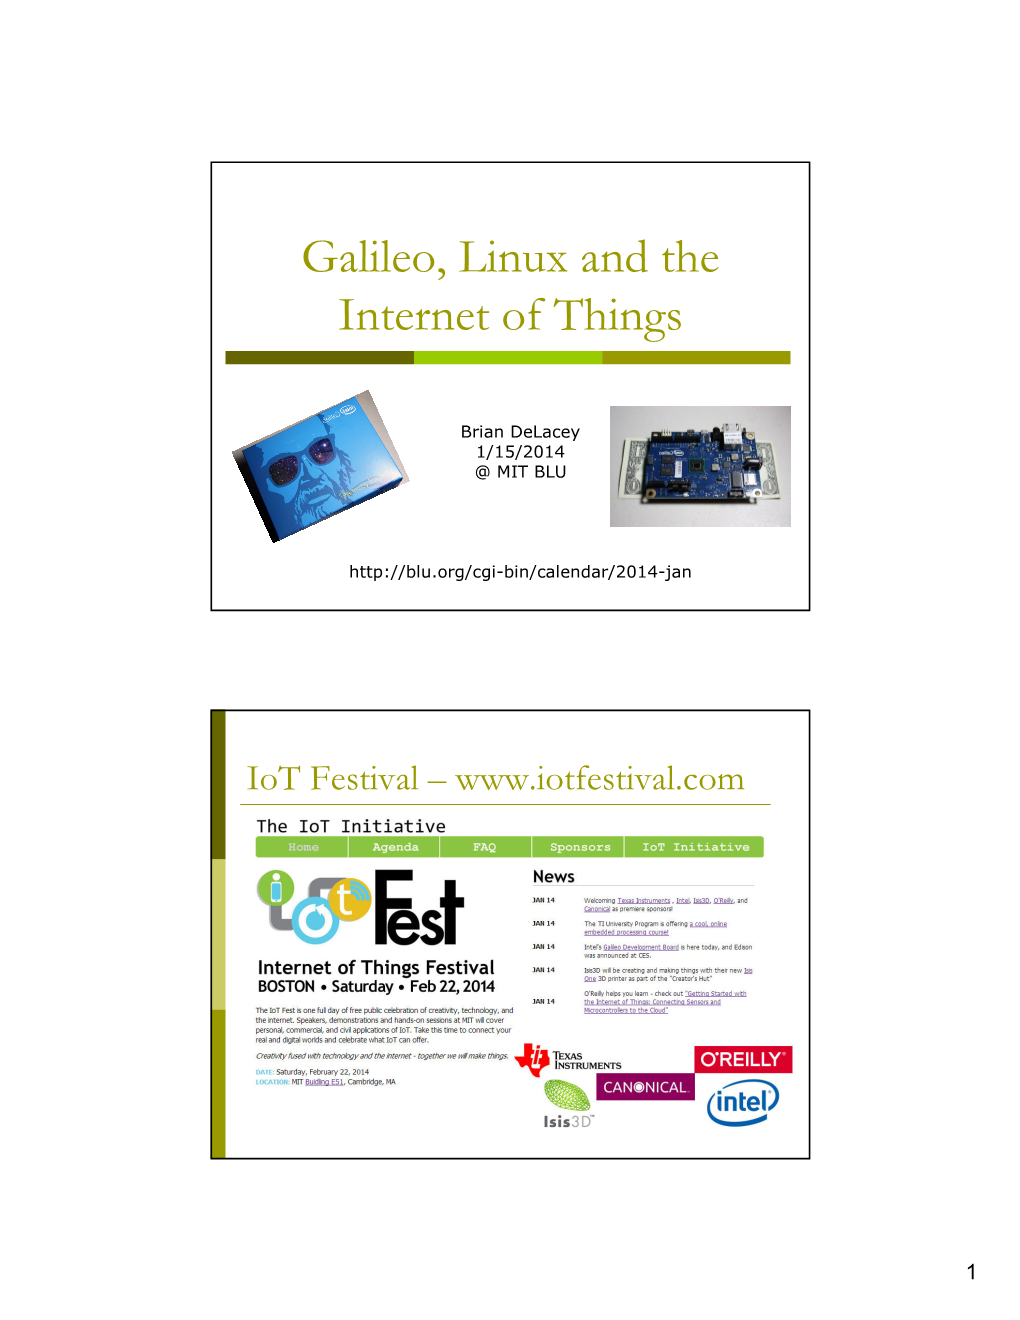 Galileo, Linux and the Internet of Things